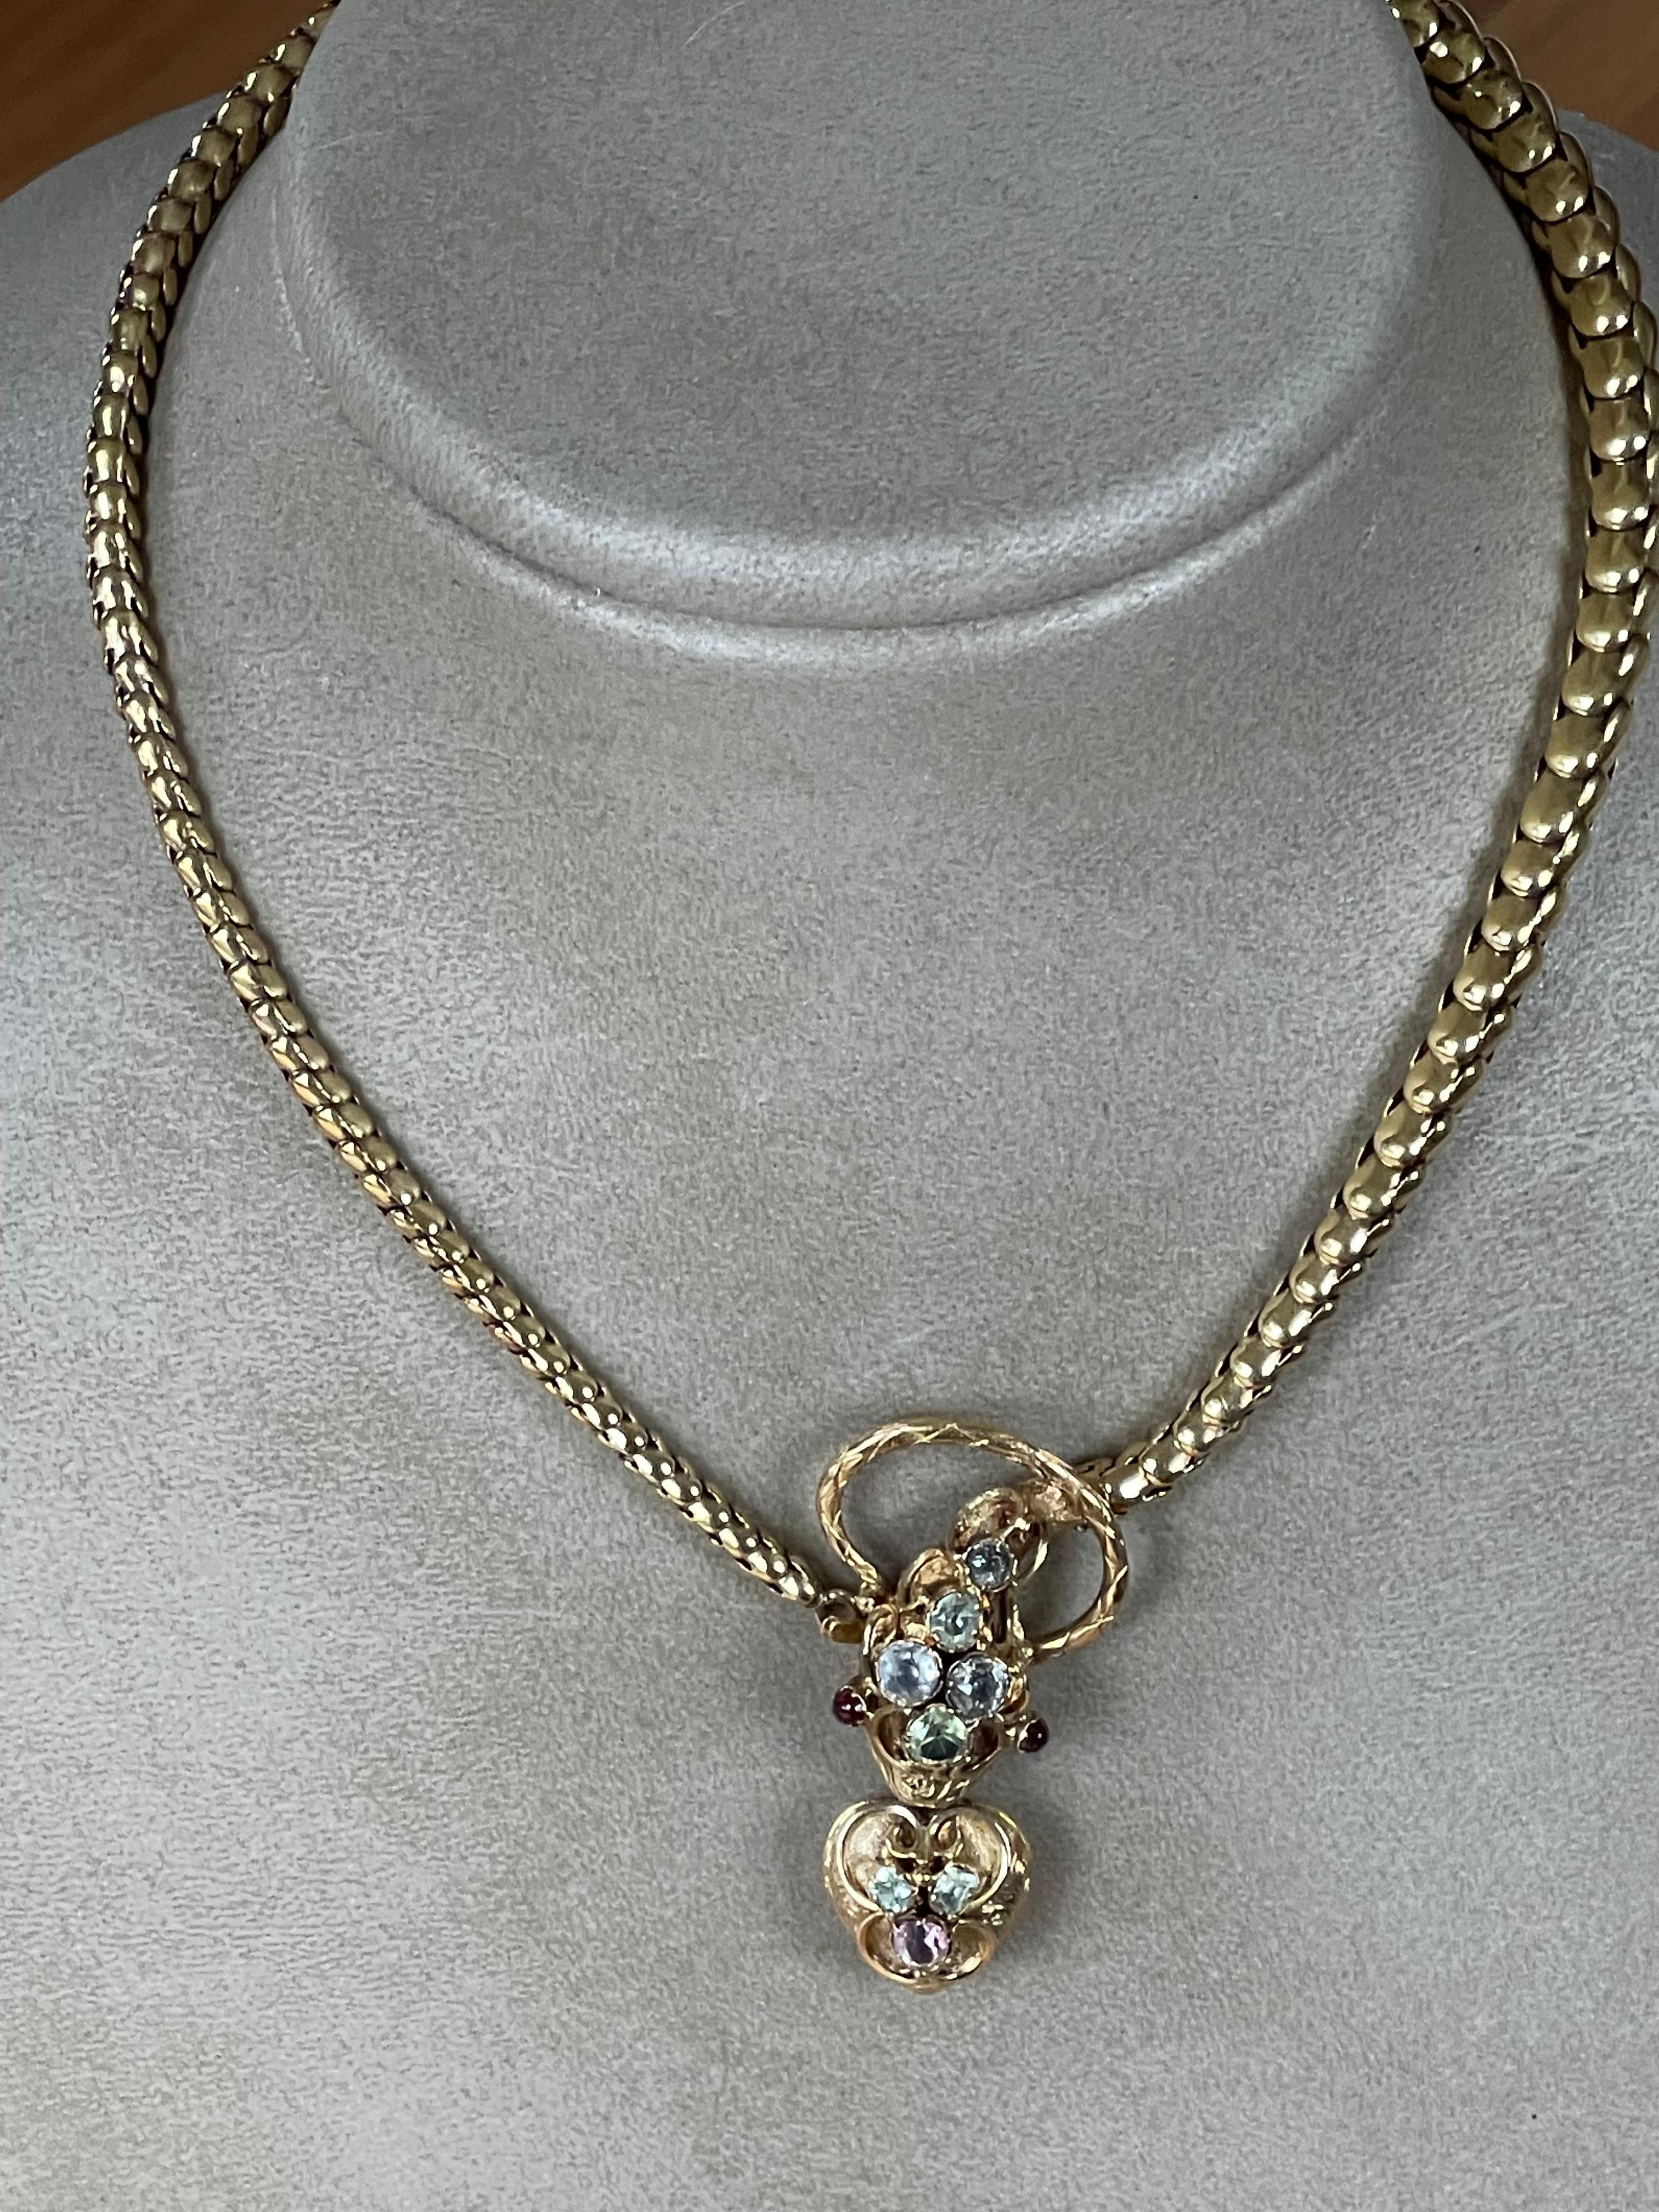 Rare 18 K Yellow Gold Victorian Snake Necklace Colored Stones In Good Condition For Sale In Zurich, Zollstrasse